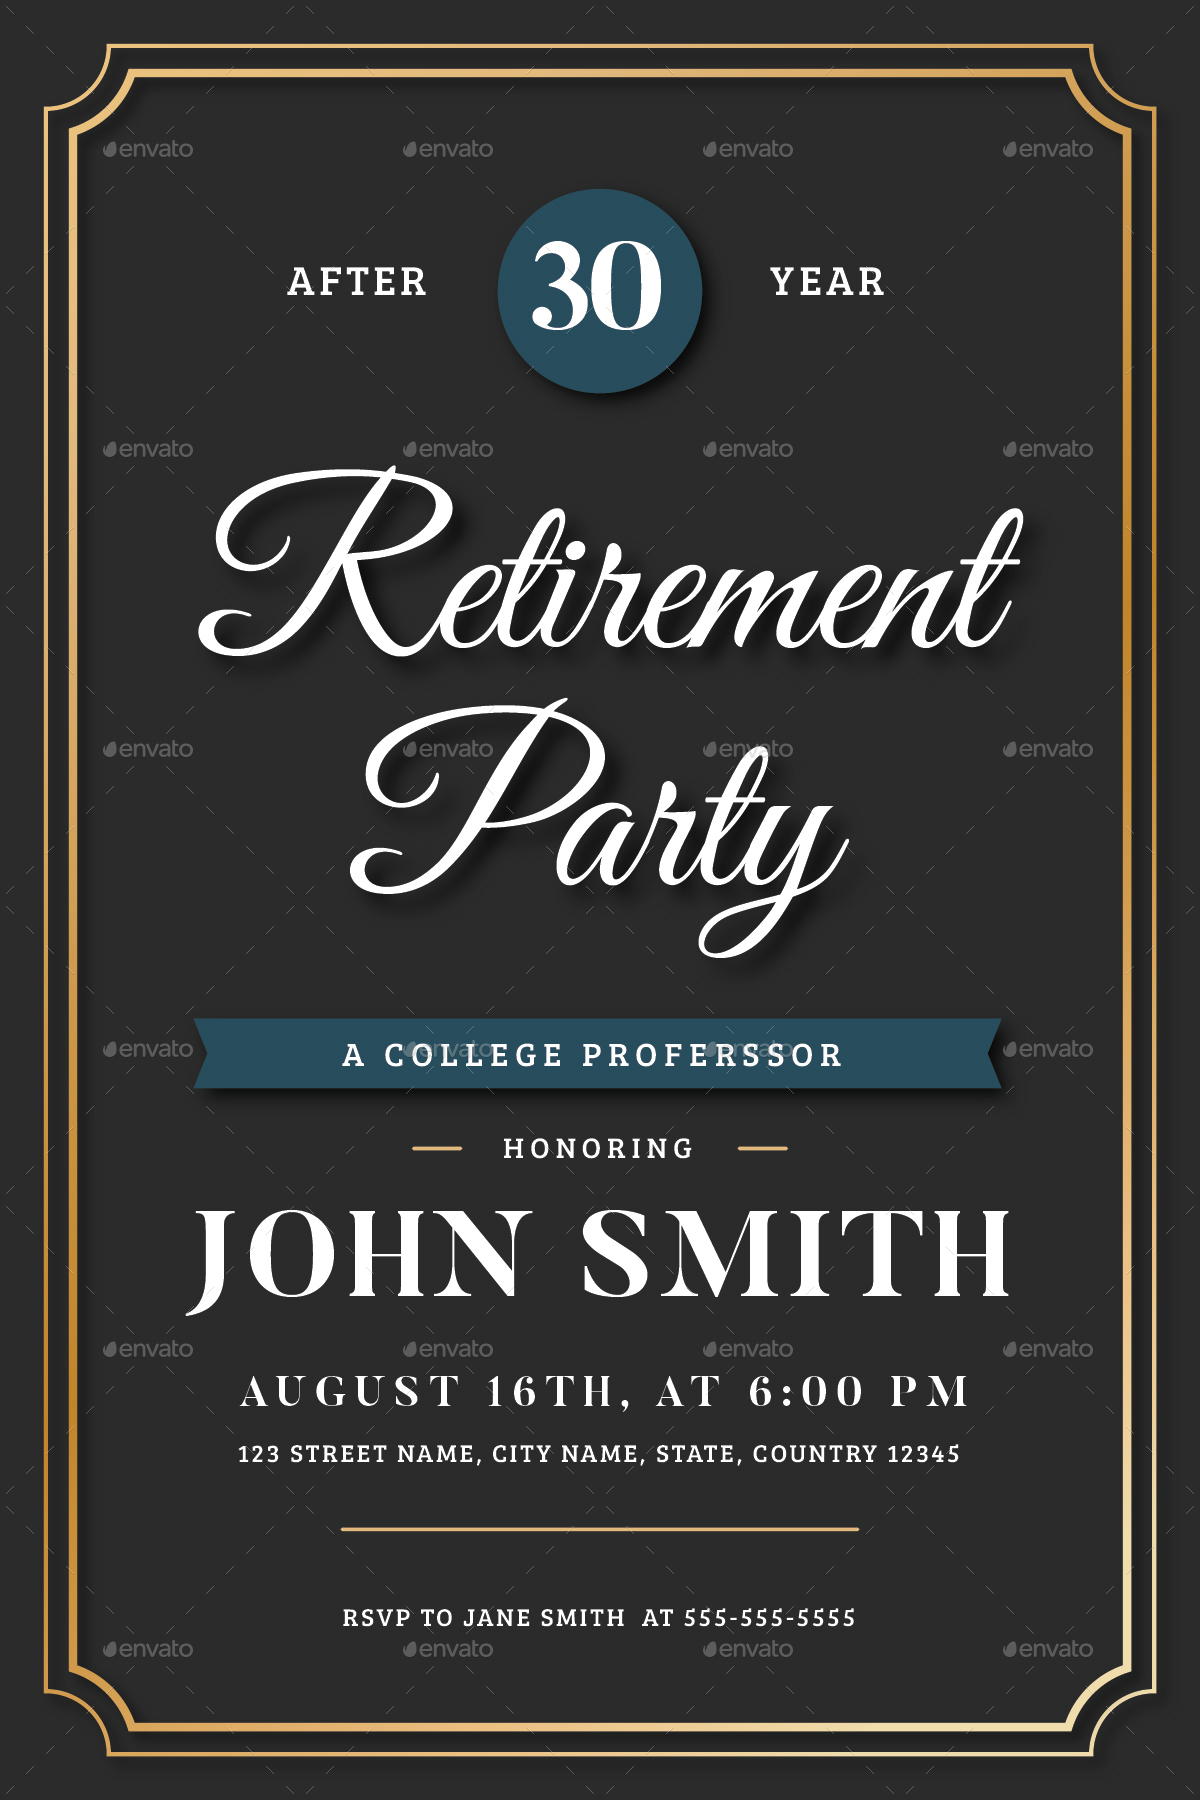 Retirement Invitation Flyer Templates by GraphicRiver